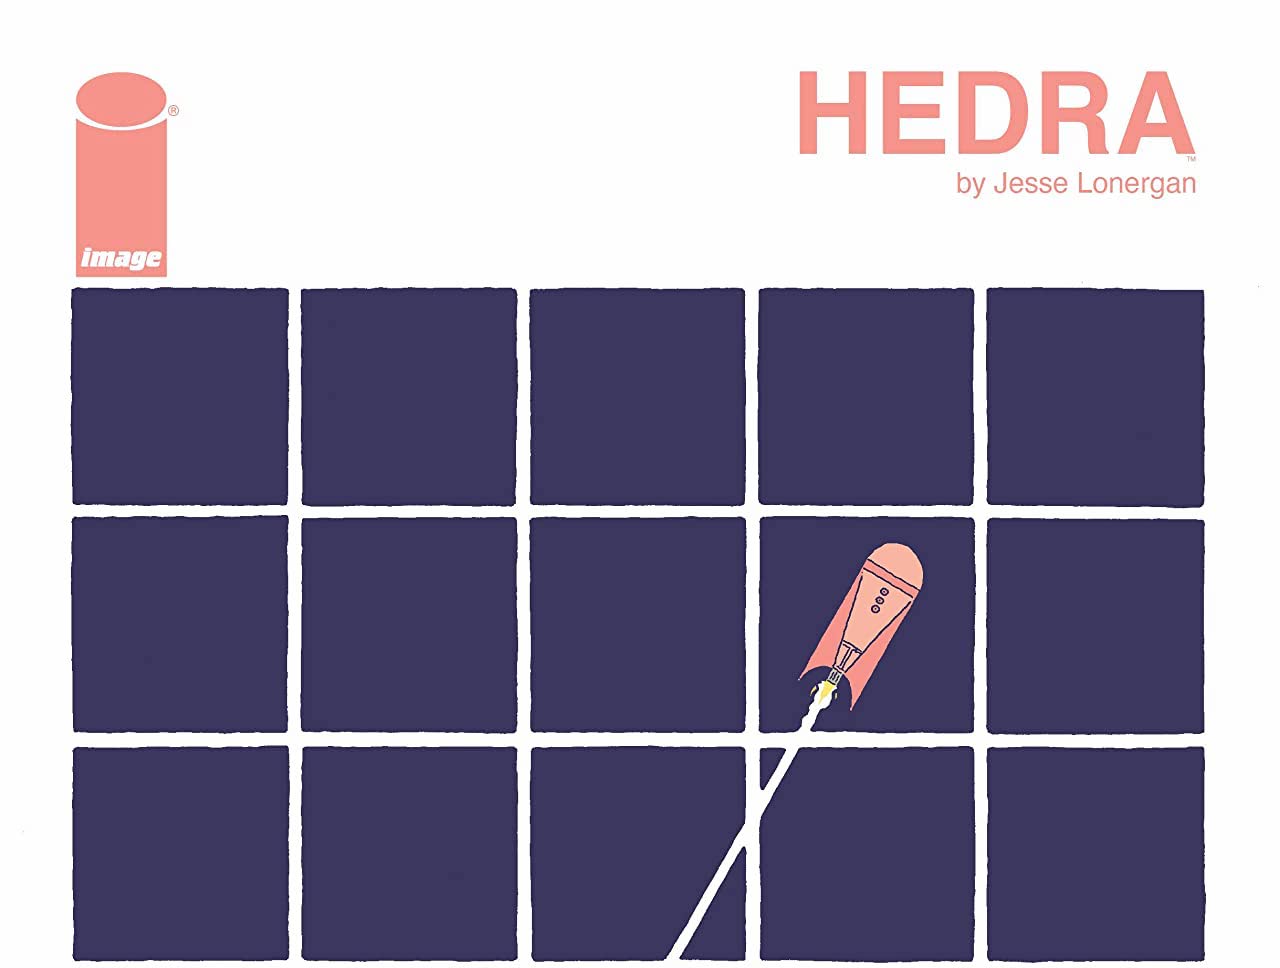 'Hedra' review: An exploratory and innovative ride by Jesse Lonergan